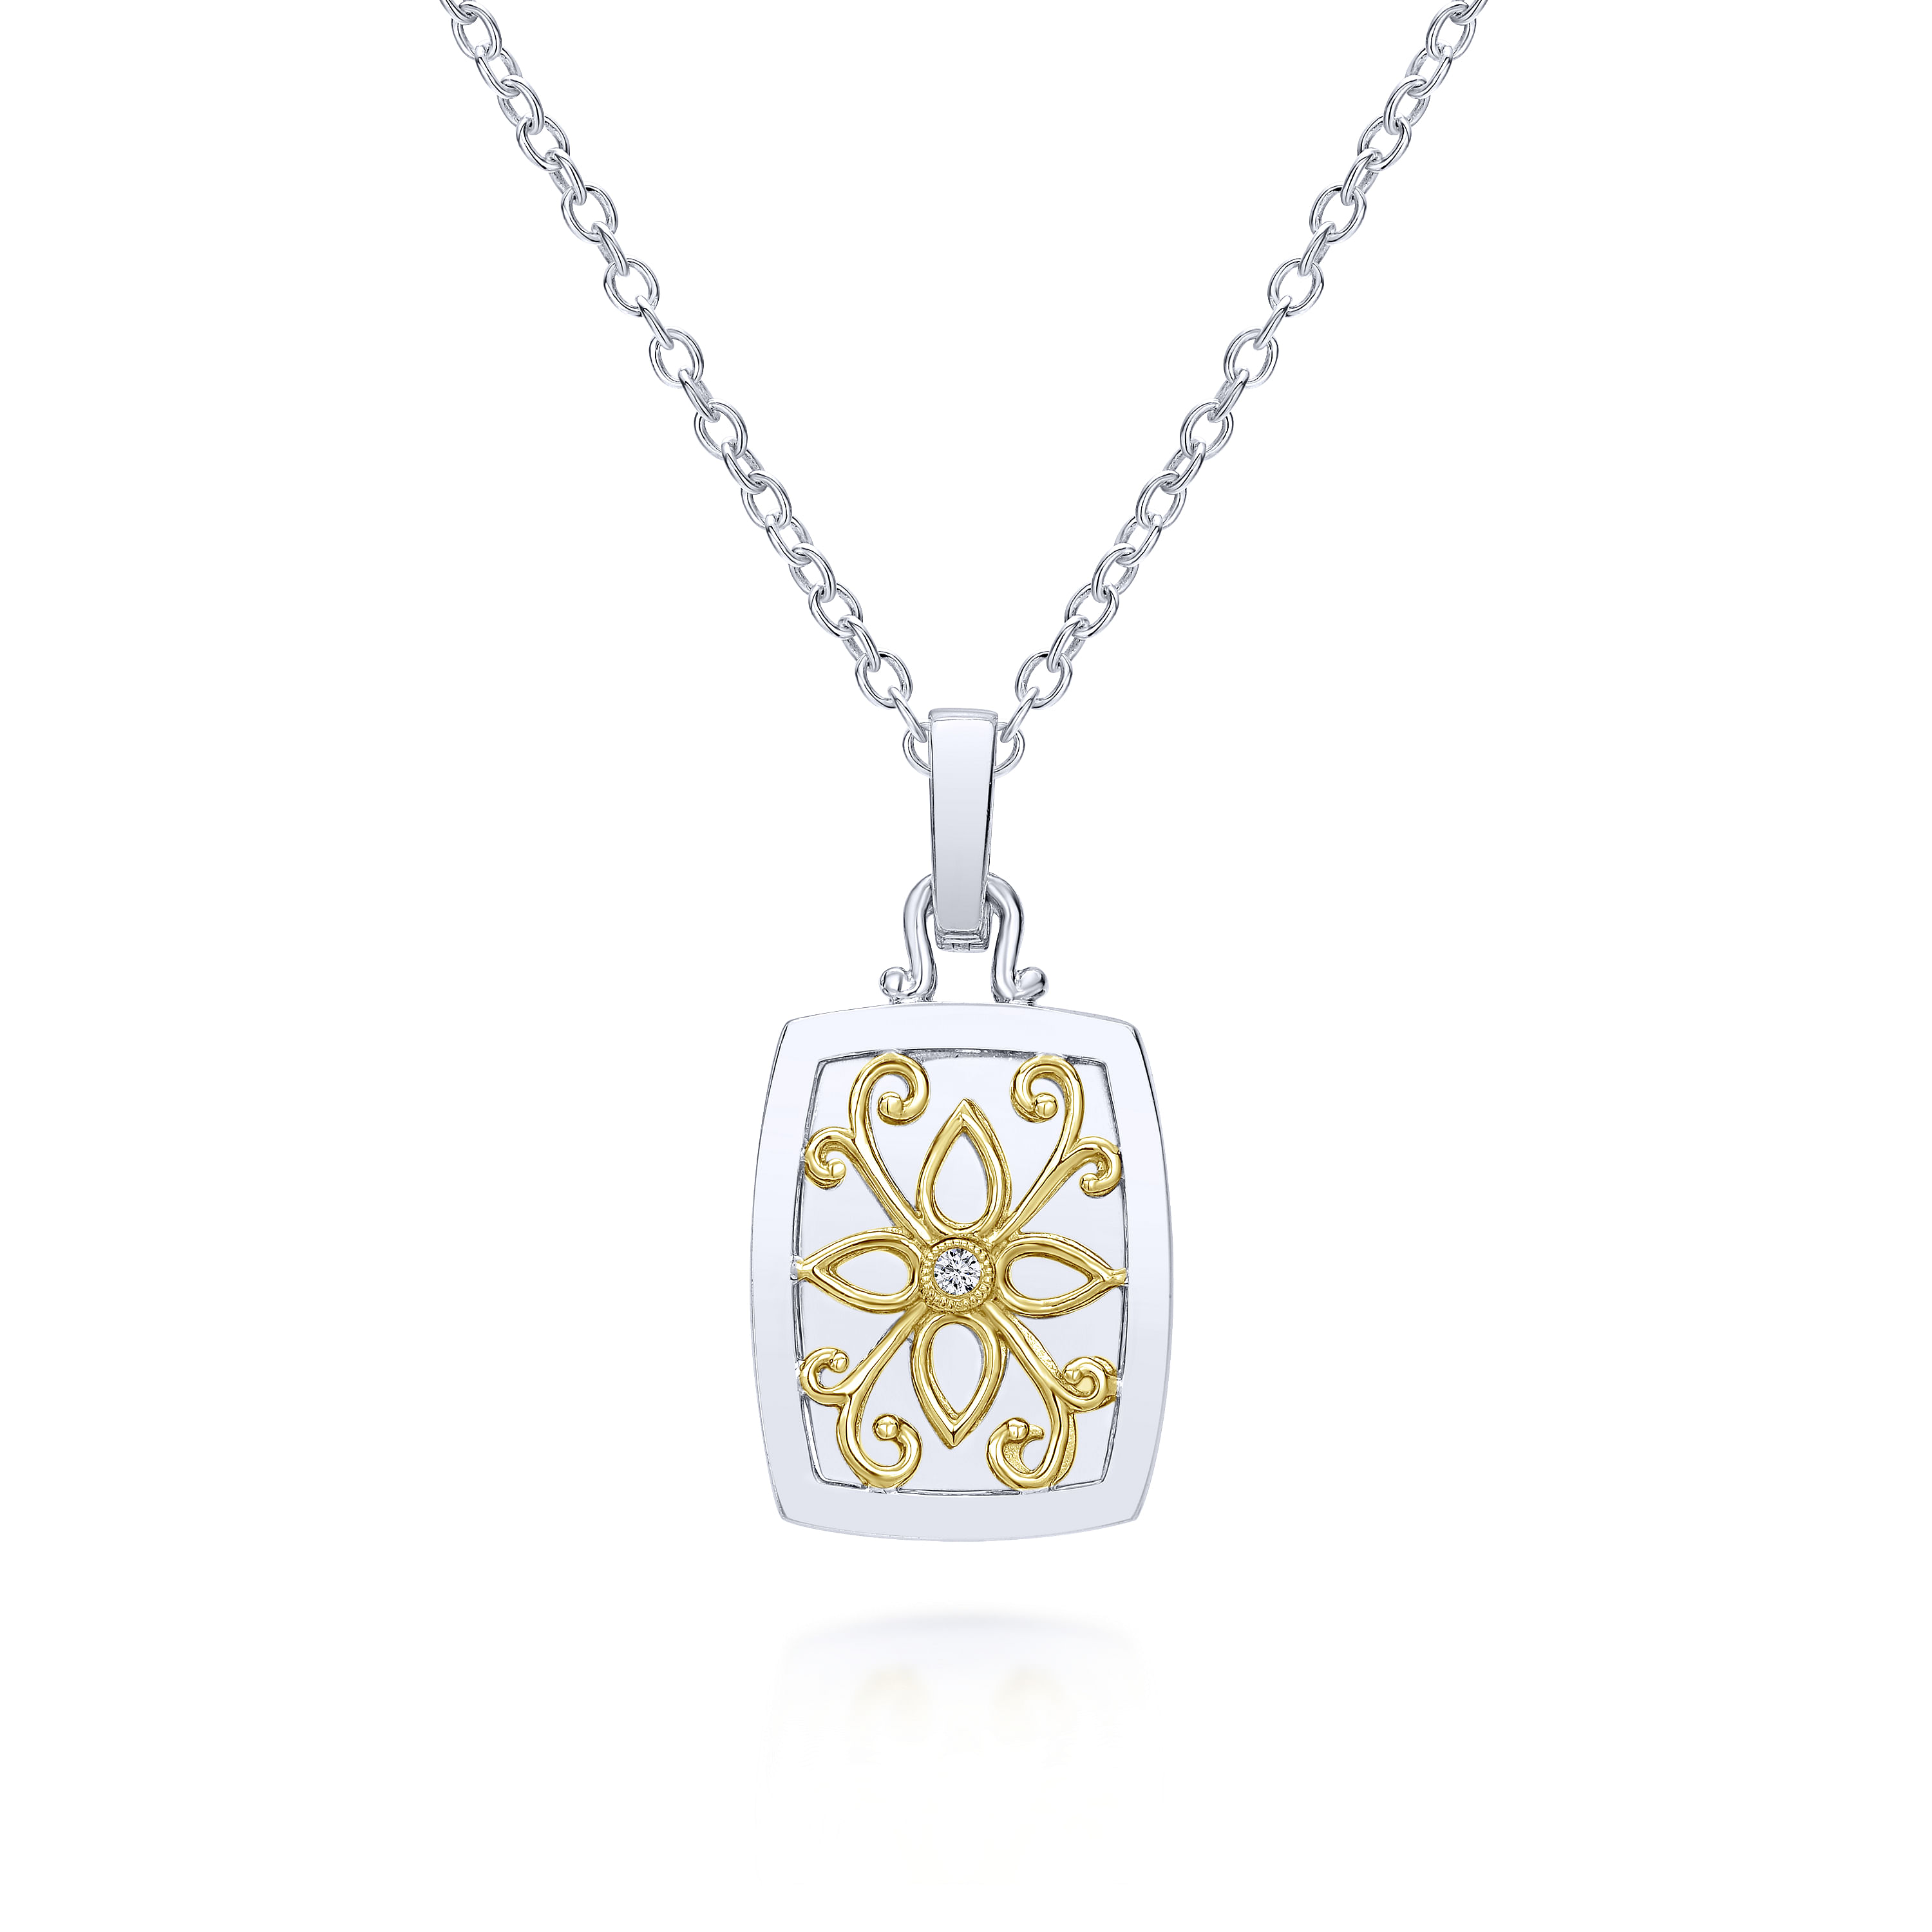 18 inch 925 Sterling Silver 18K Yellow Gold Oval Filigree Diamond Pendant Necklace